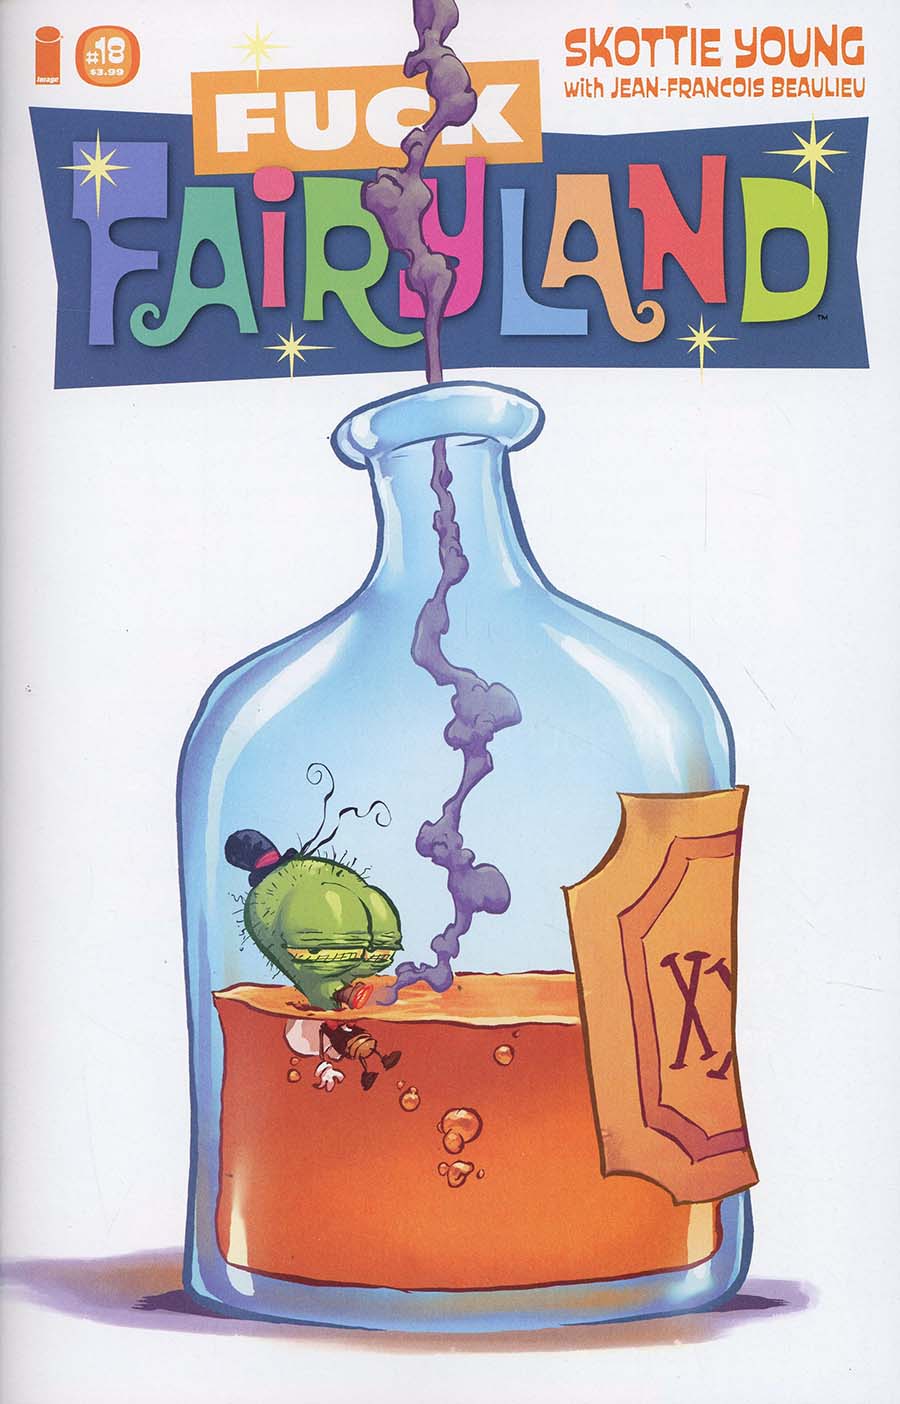 I Hate Fairyland #18 Cover B Variant Skottie Young F*ck Fairyland Cover